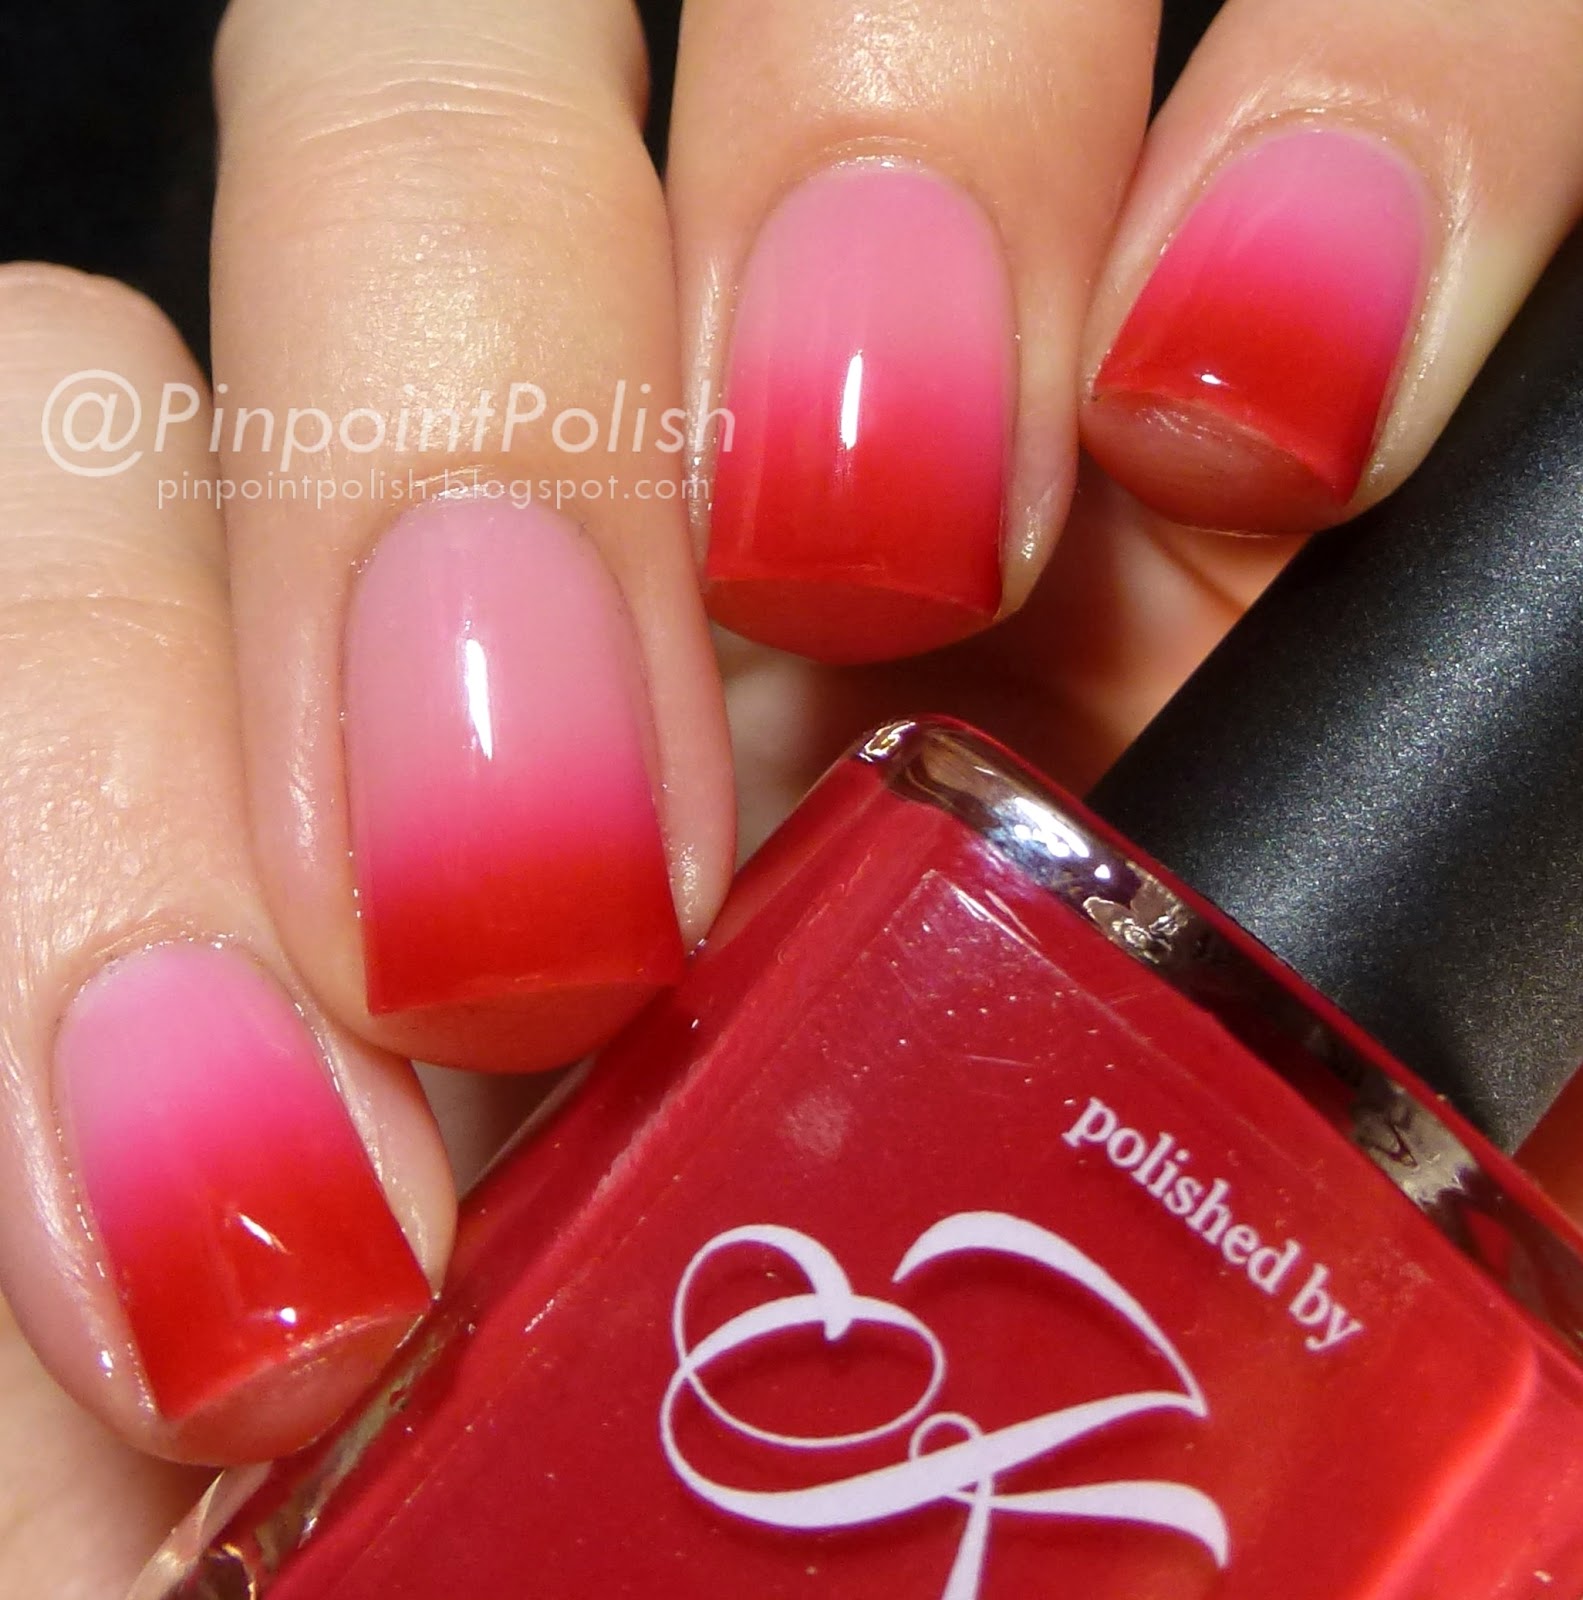 Pinpoint Polish!: Polished by KPT - Don't Be Ranunculus & Camellia